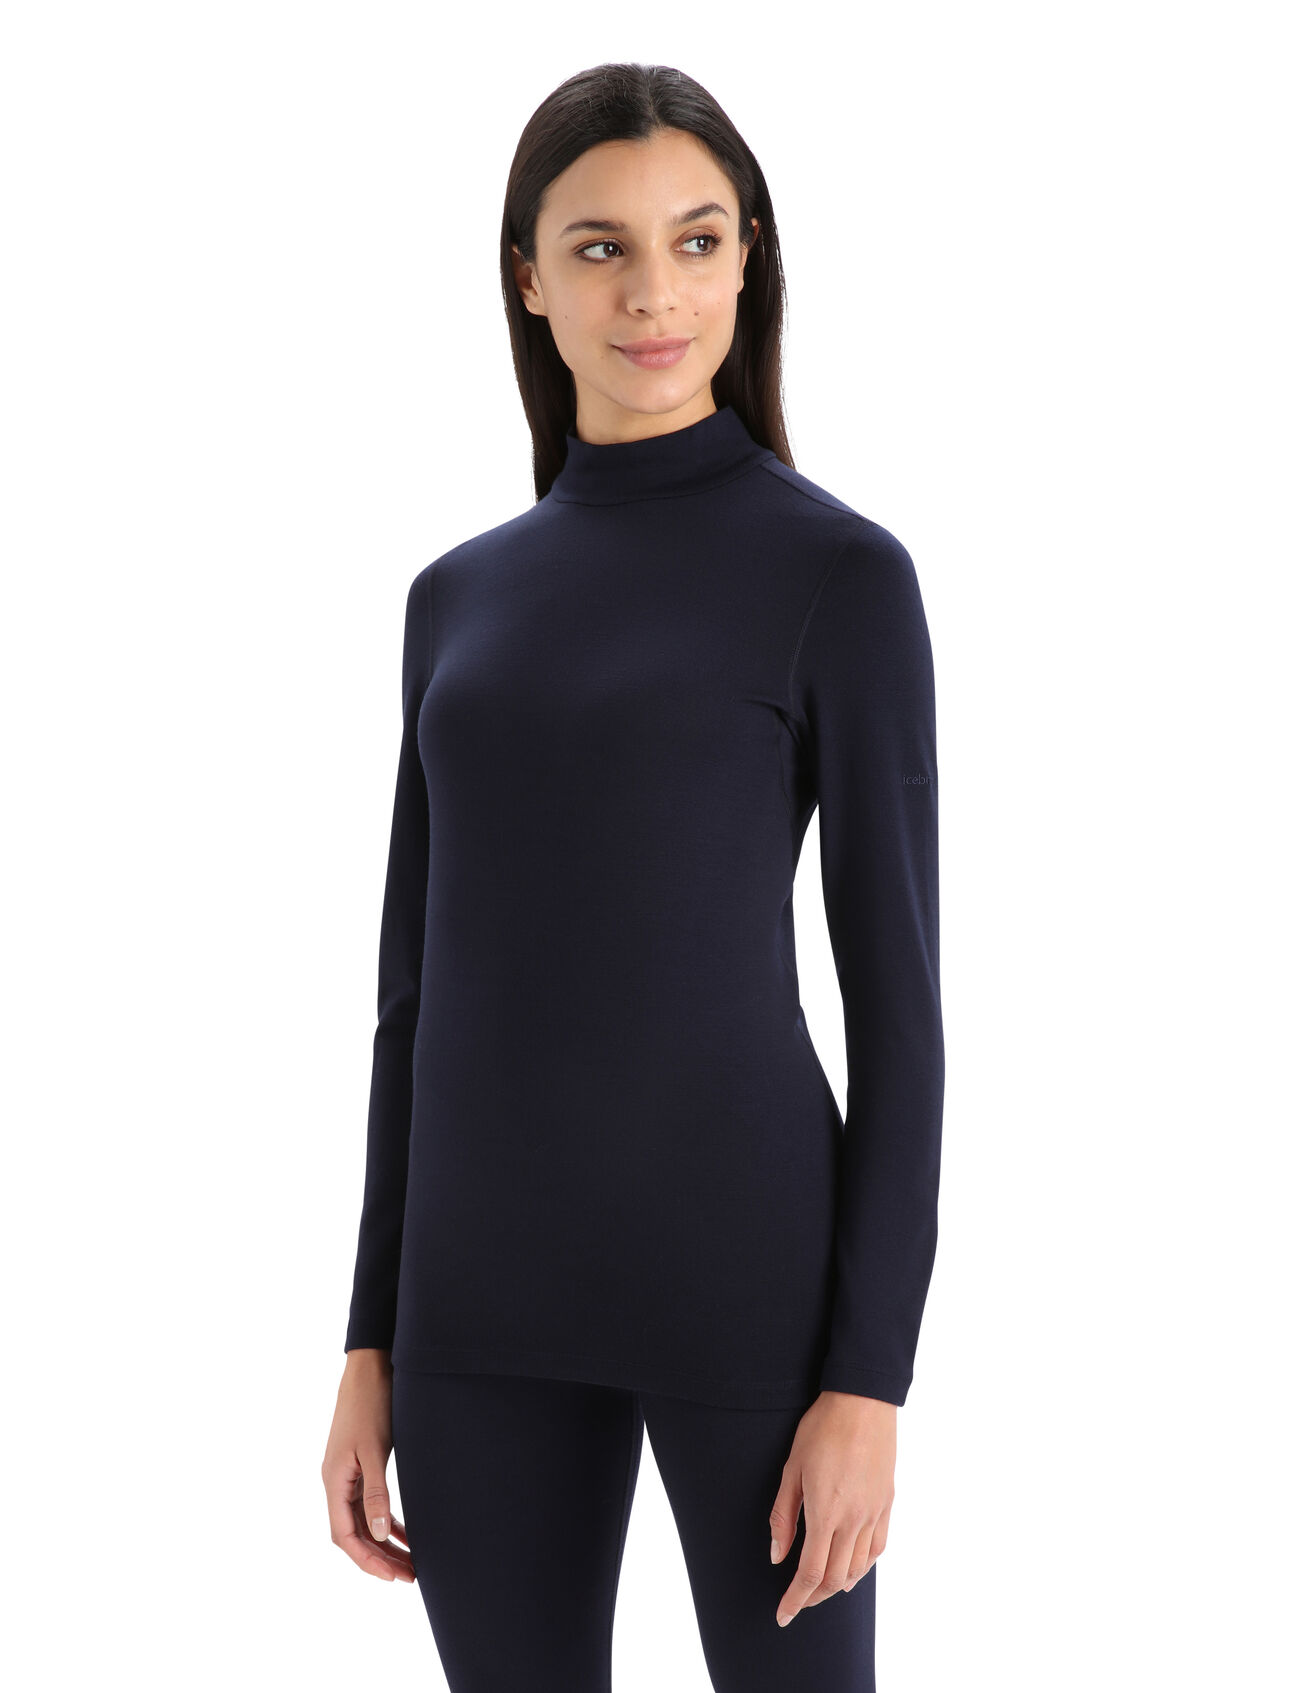 Womens Merino 260 Tech Long Sleeve Turtleneck An incredibly warm merino base layer for the coldest months of the year, the 260 Tech Long Sleeve Turtleneck is a go-to piece for winter layering—ideal for skiing, snowshoeing and other cold-weather pursuits.